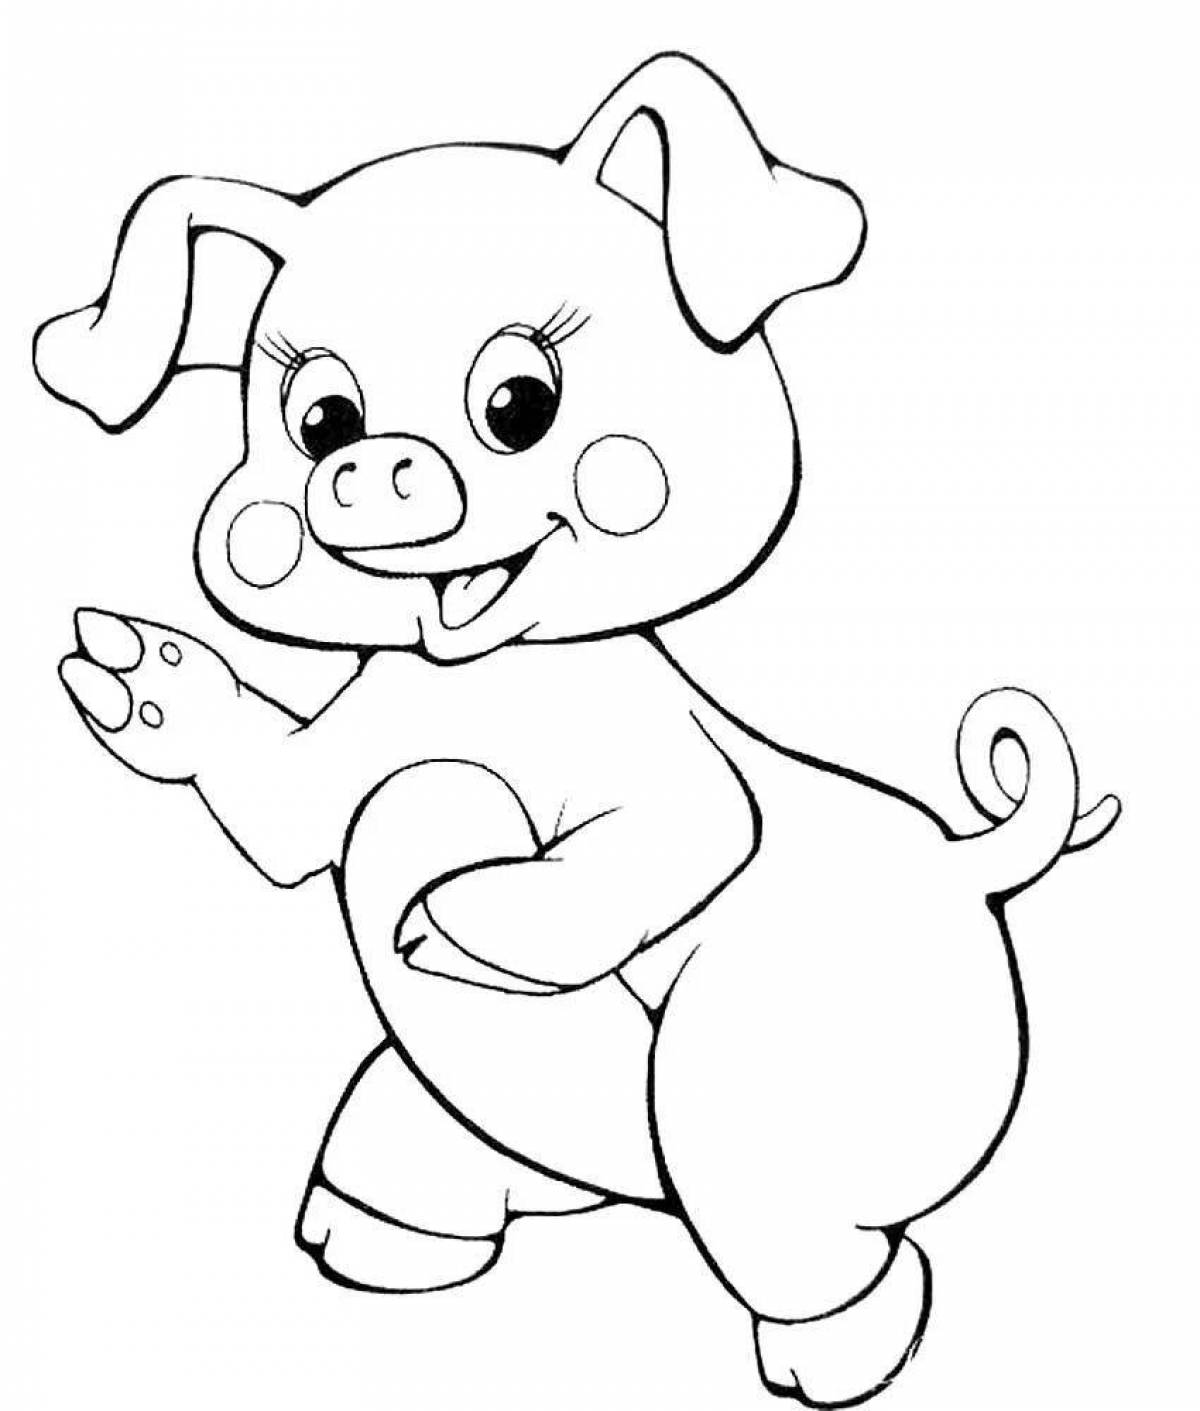 Exquisite coloring book for kids Piglet